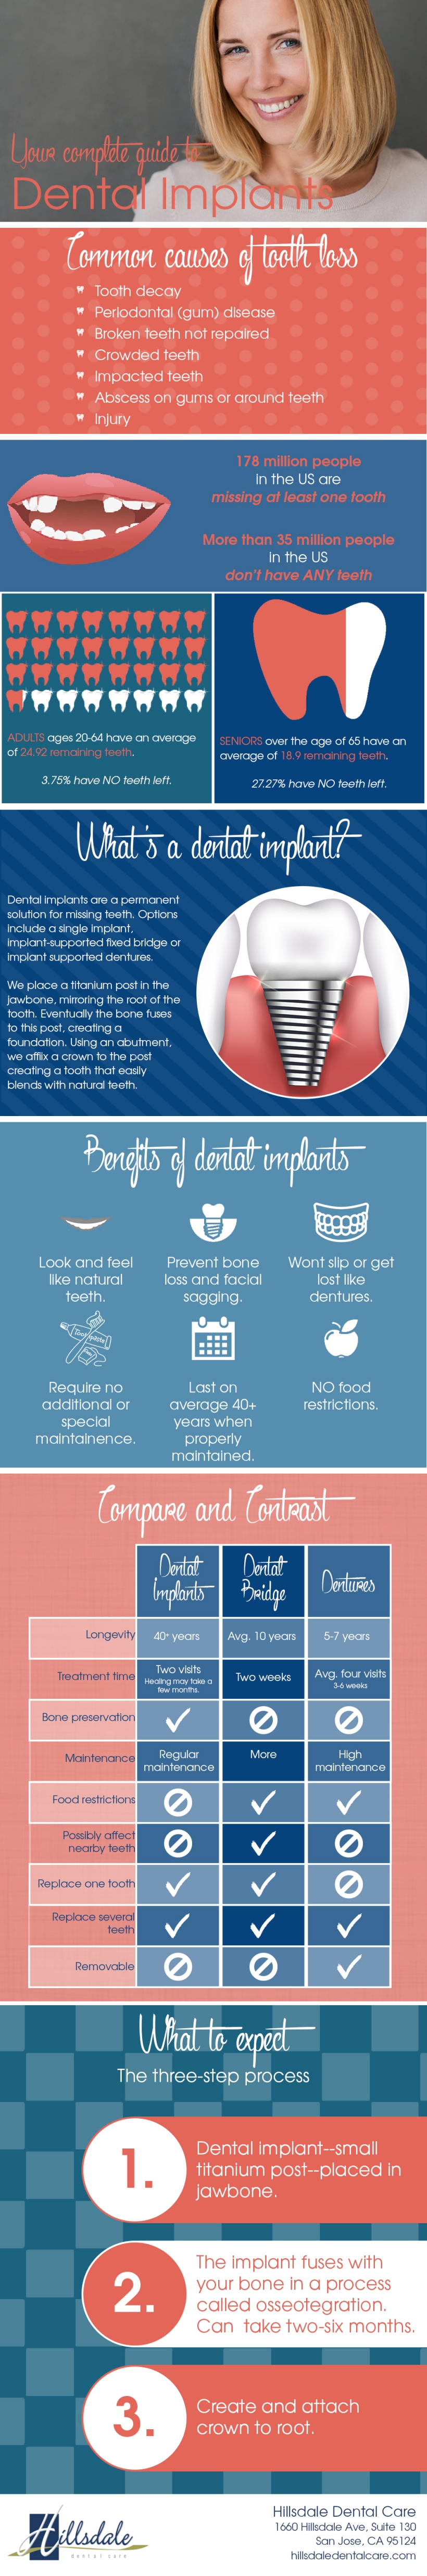 Complete Guide to Dental Implants INFOGRAPHIC